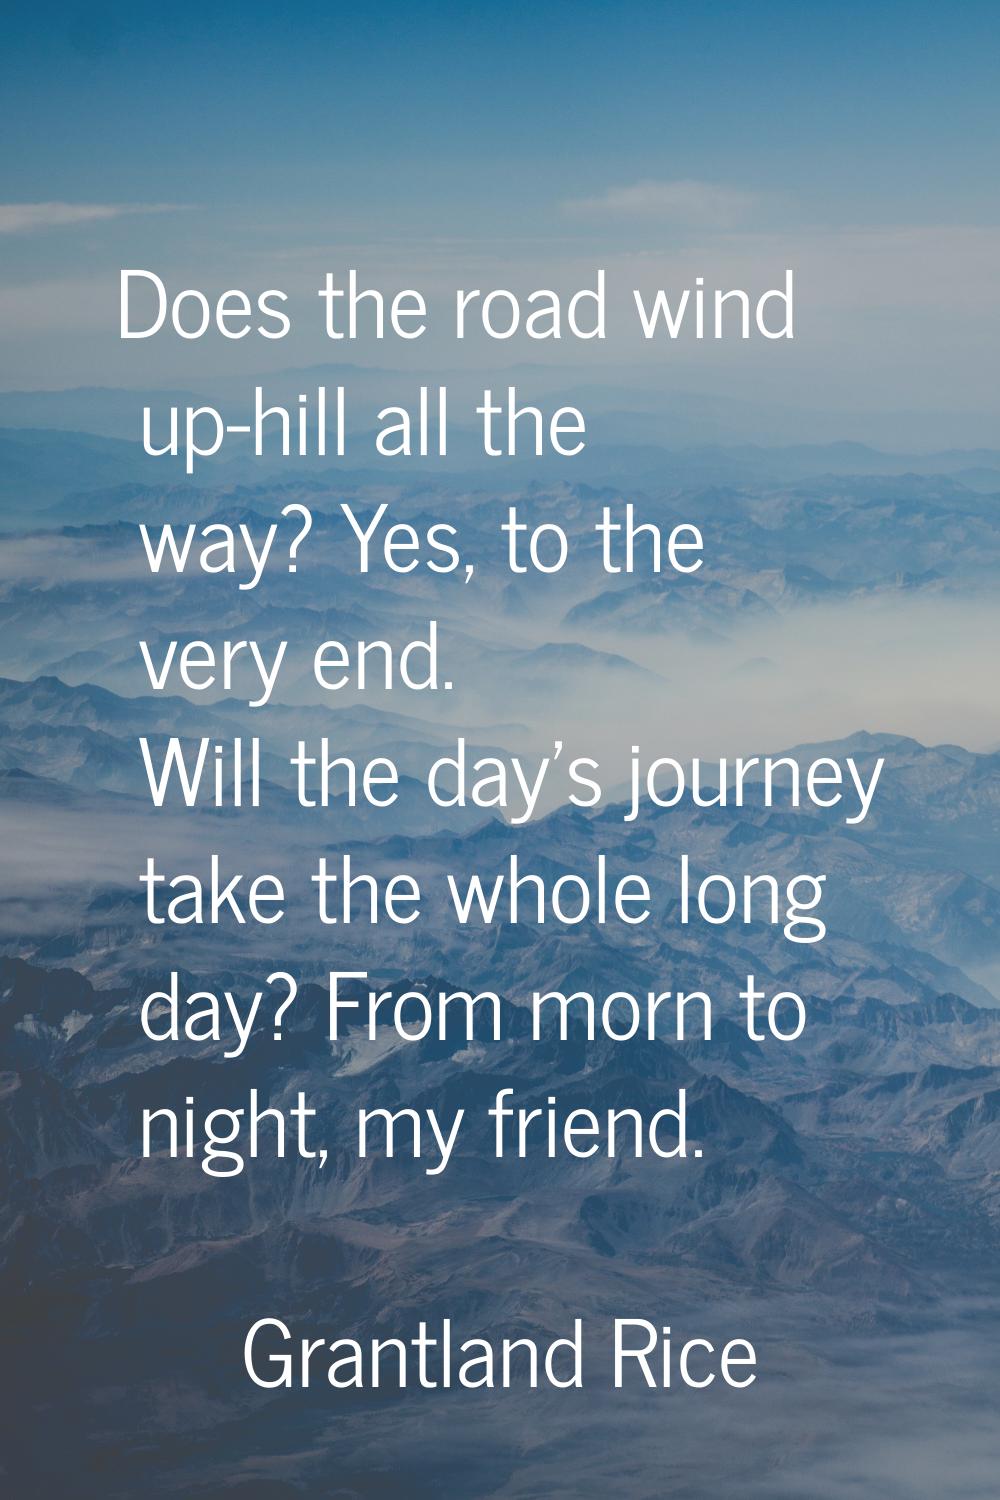 Does the road wind up-hill all the way? Yes, to the very end. Will the day's journey take the whole